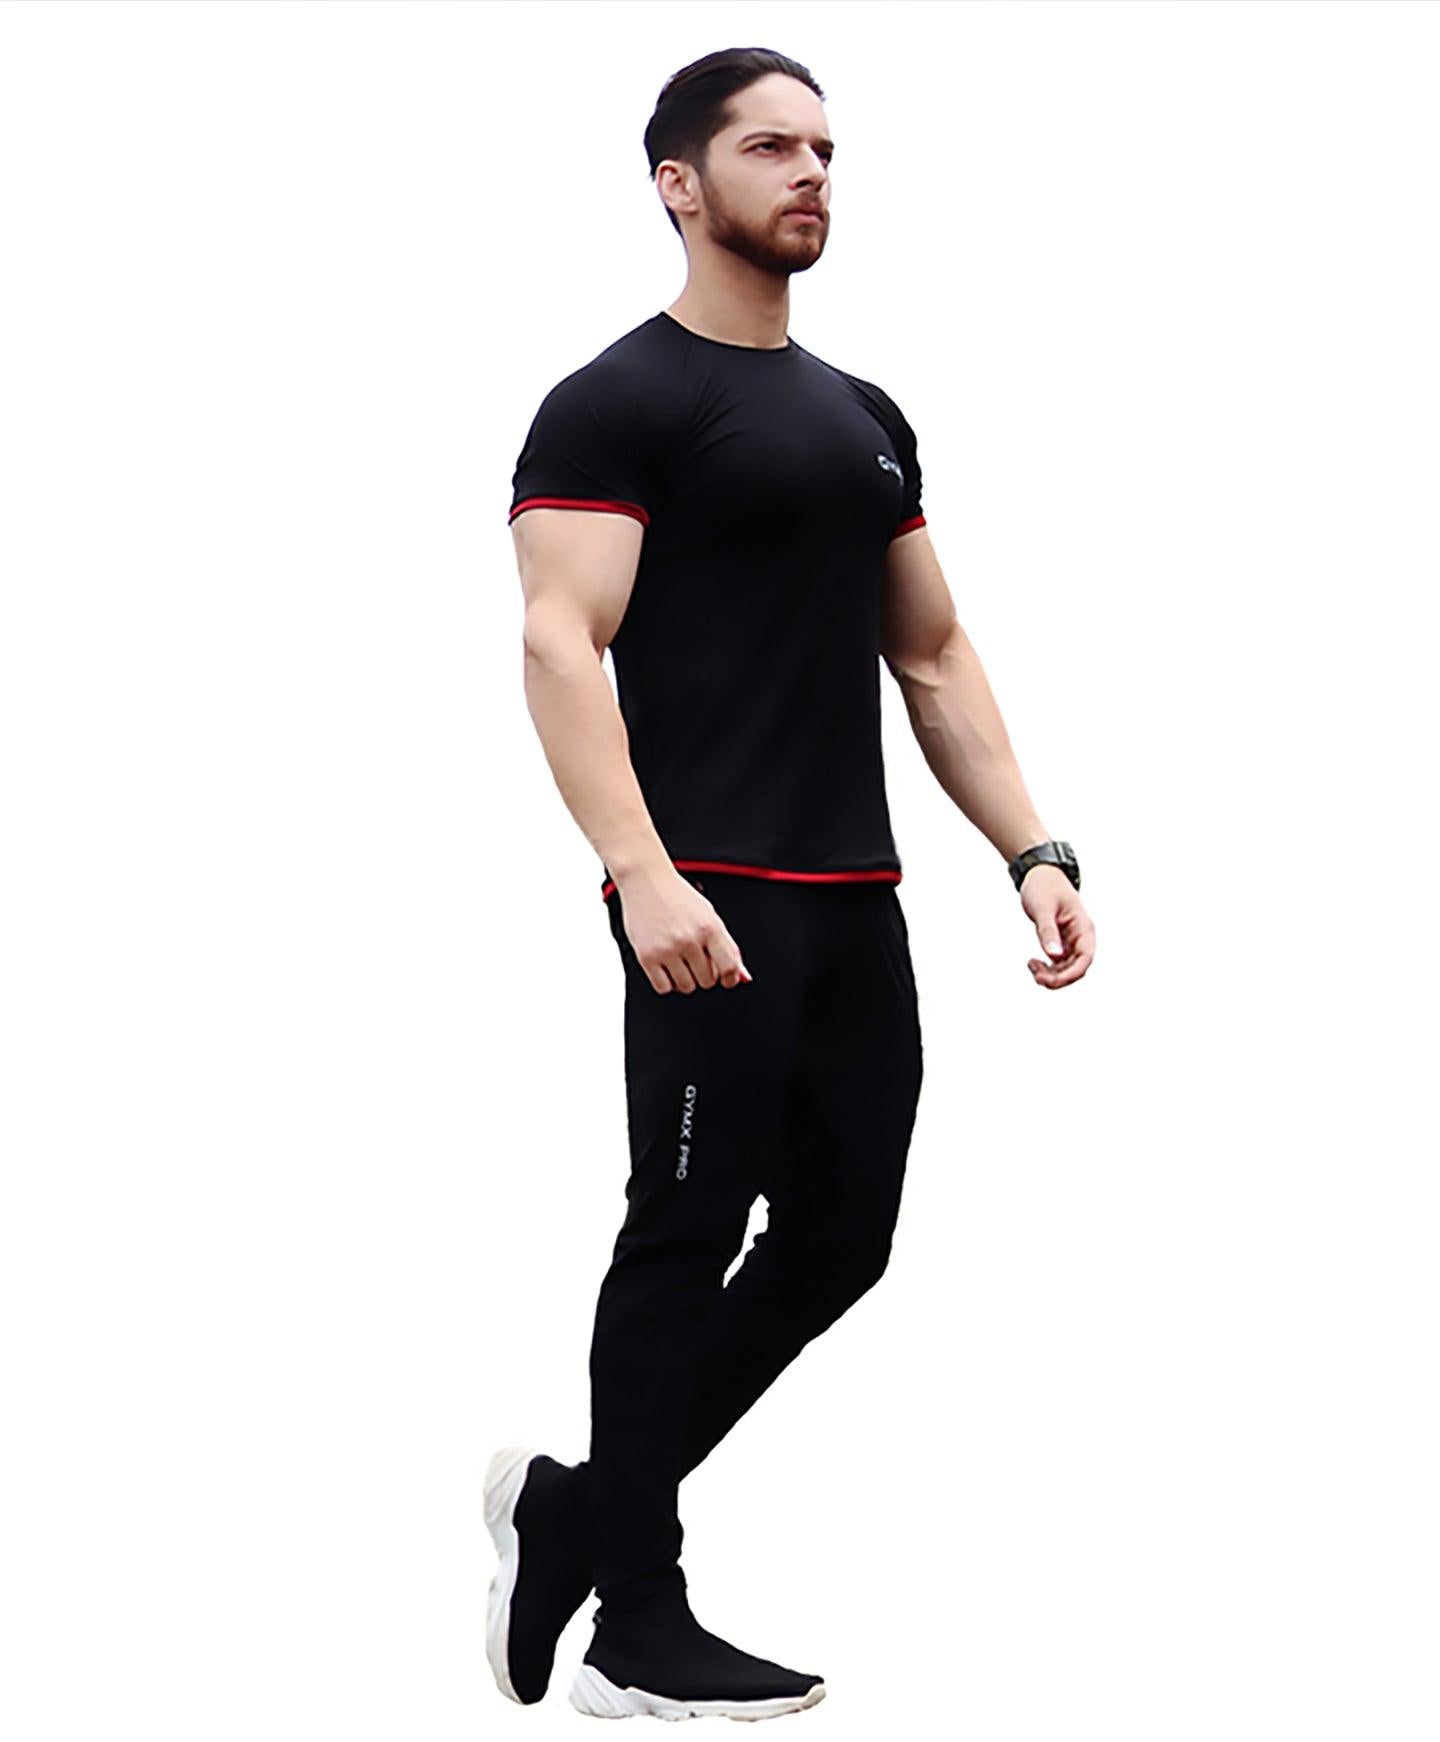 Attitude Rage Black Muscle Fit Tee - GymX